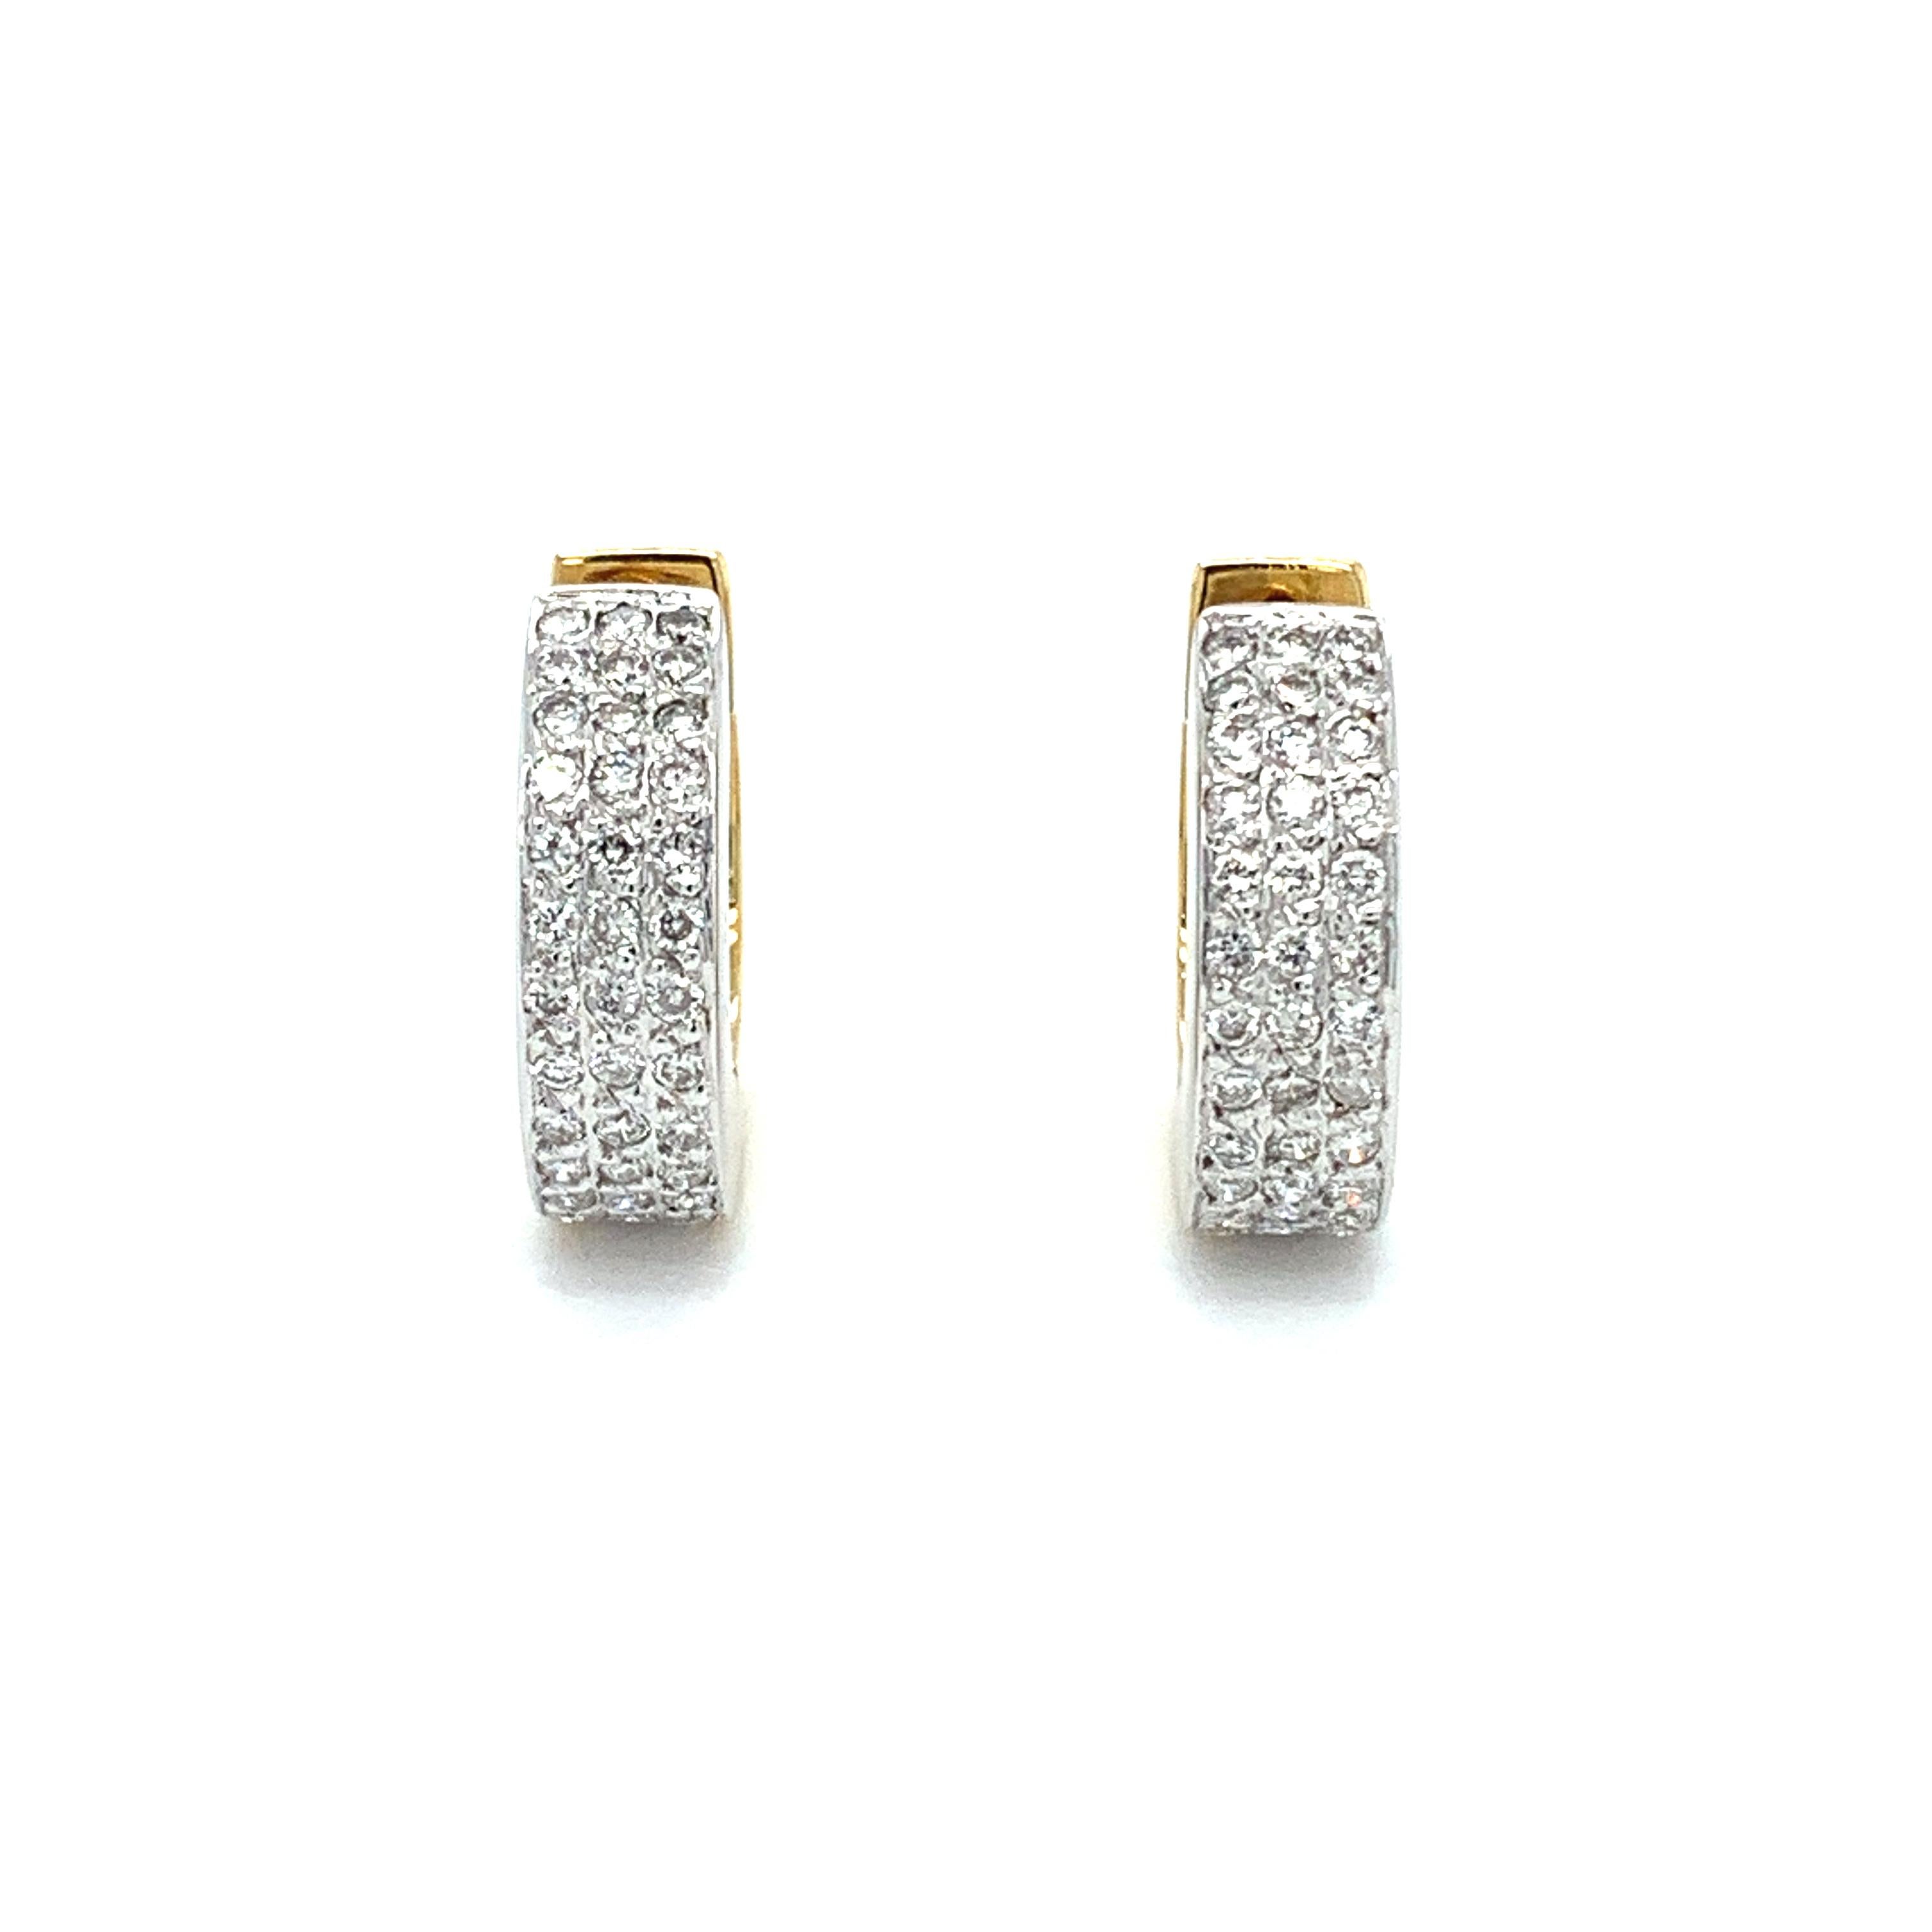 Round Cut Diamond pave hoops huggies clip earrings 18k yellow and white gold For Sale